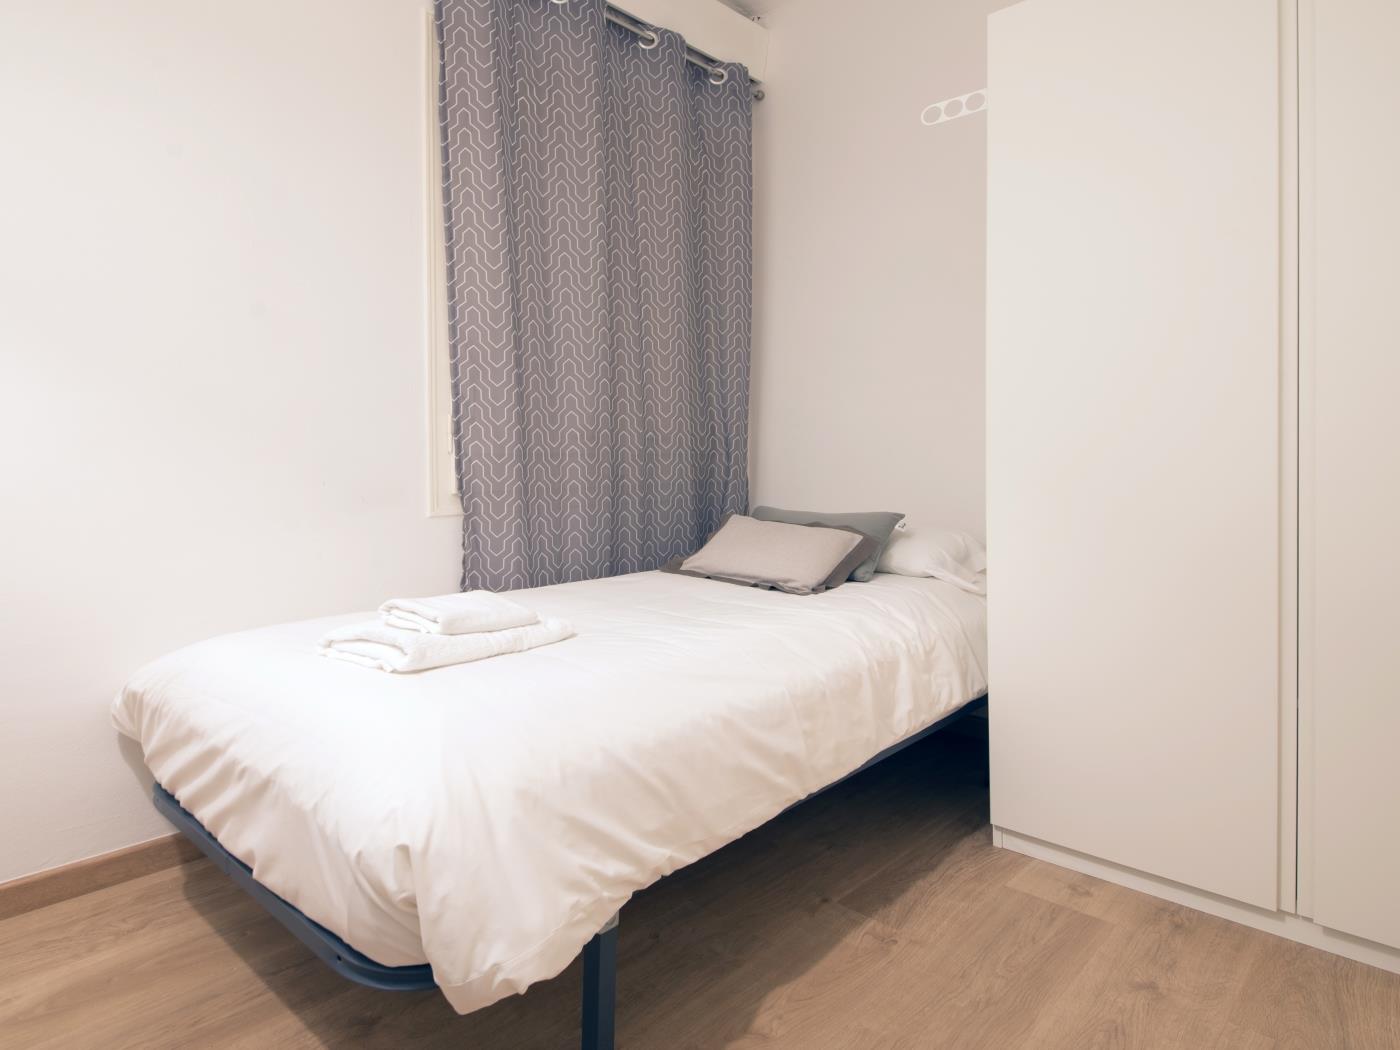 Furnished and equipped flat for seasons in Putxet with terrace - My Space Barcelona Apartments